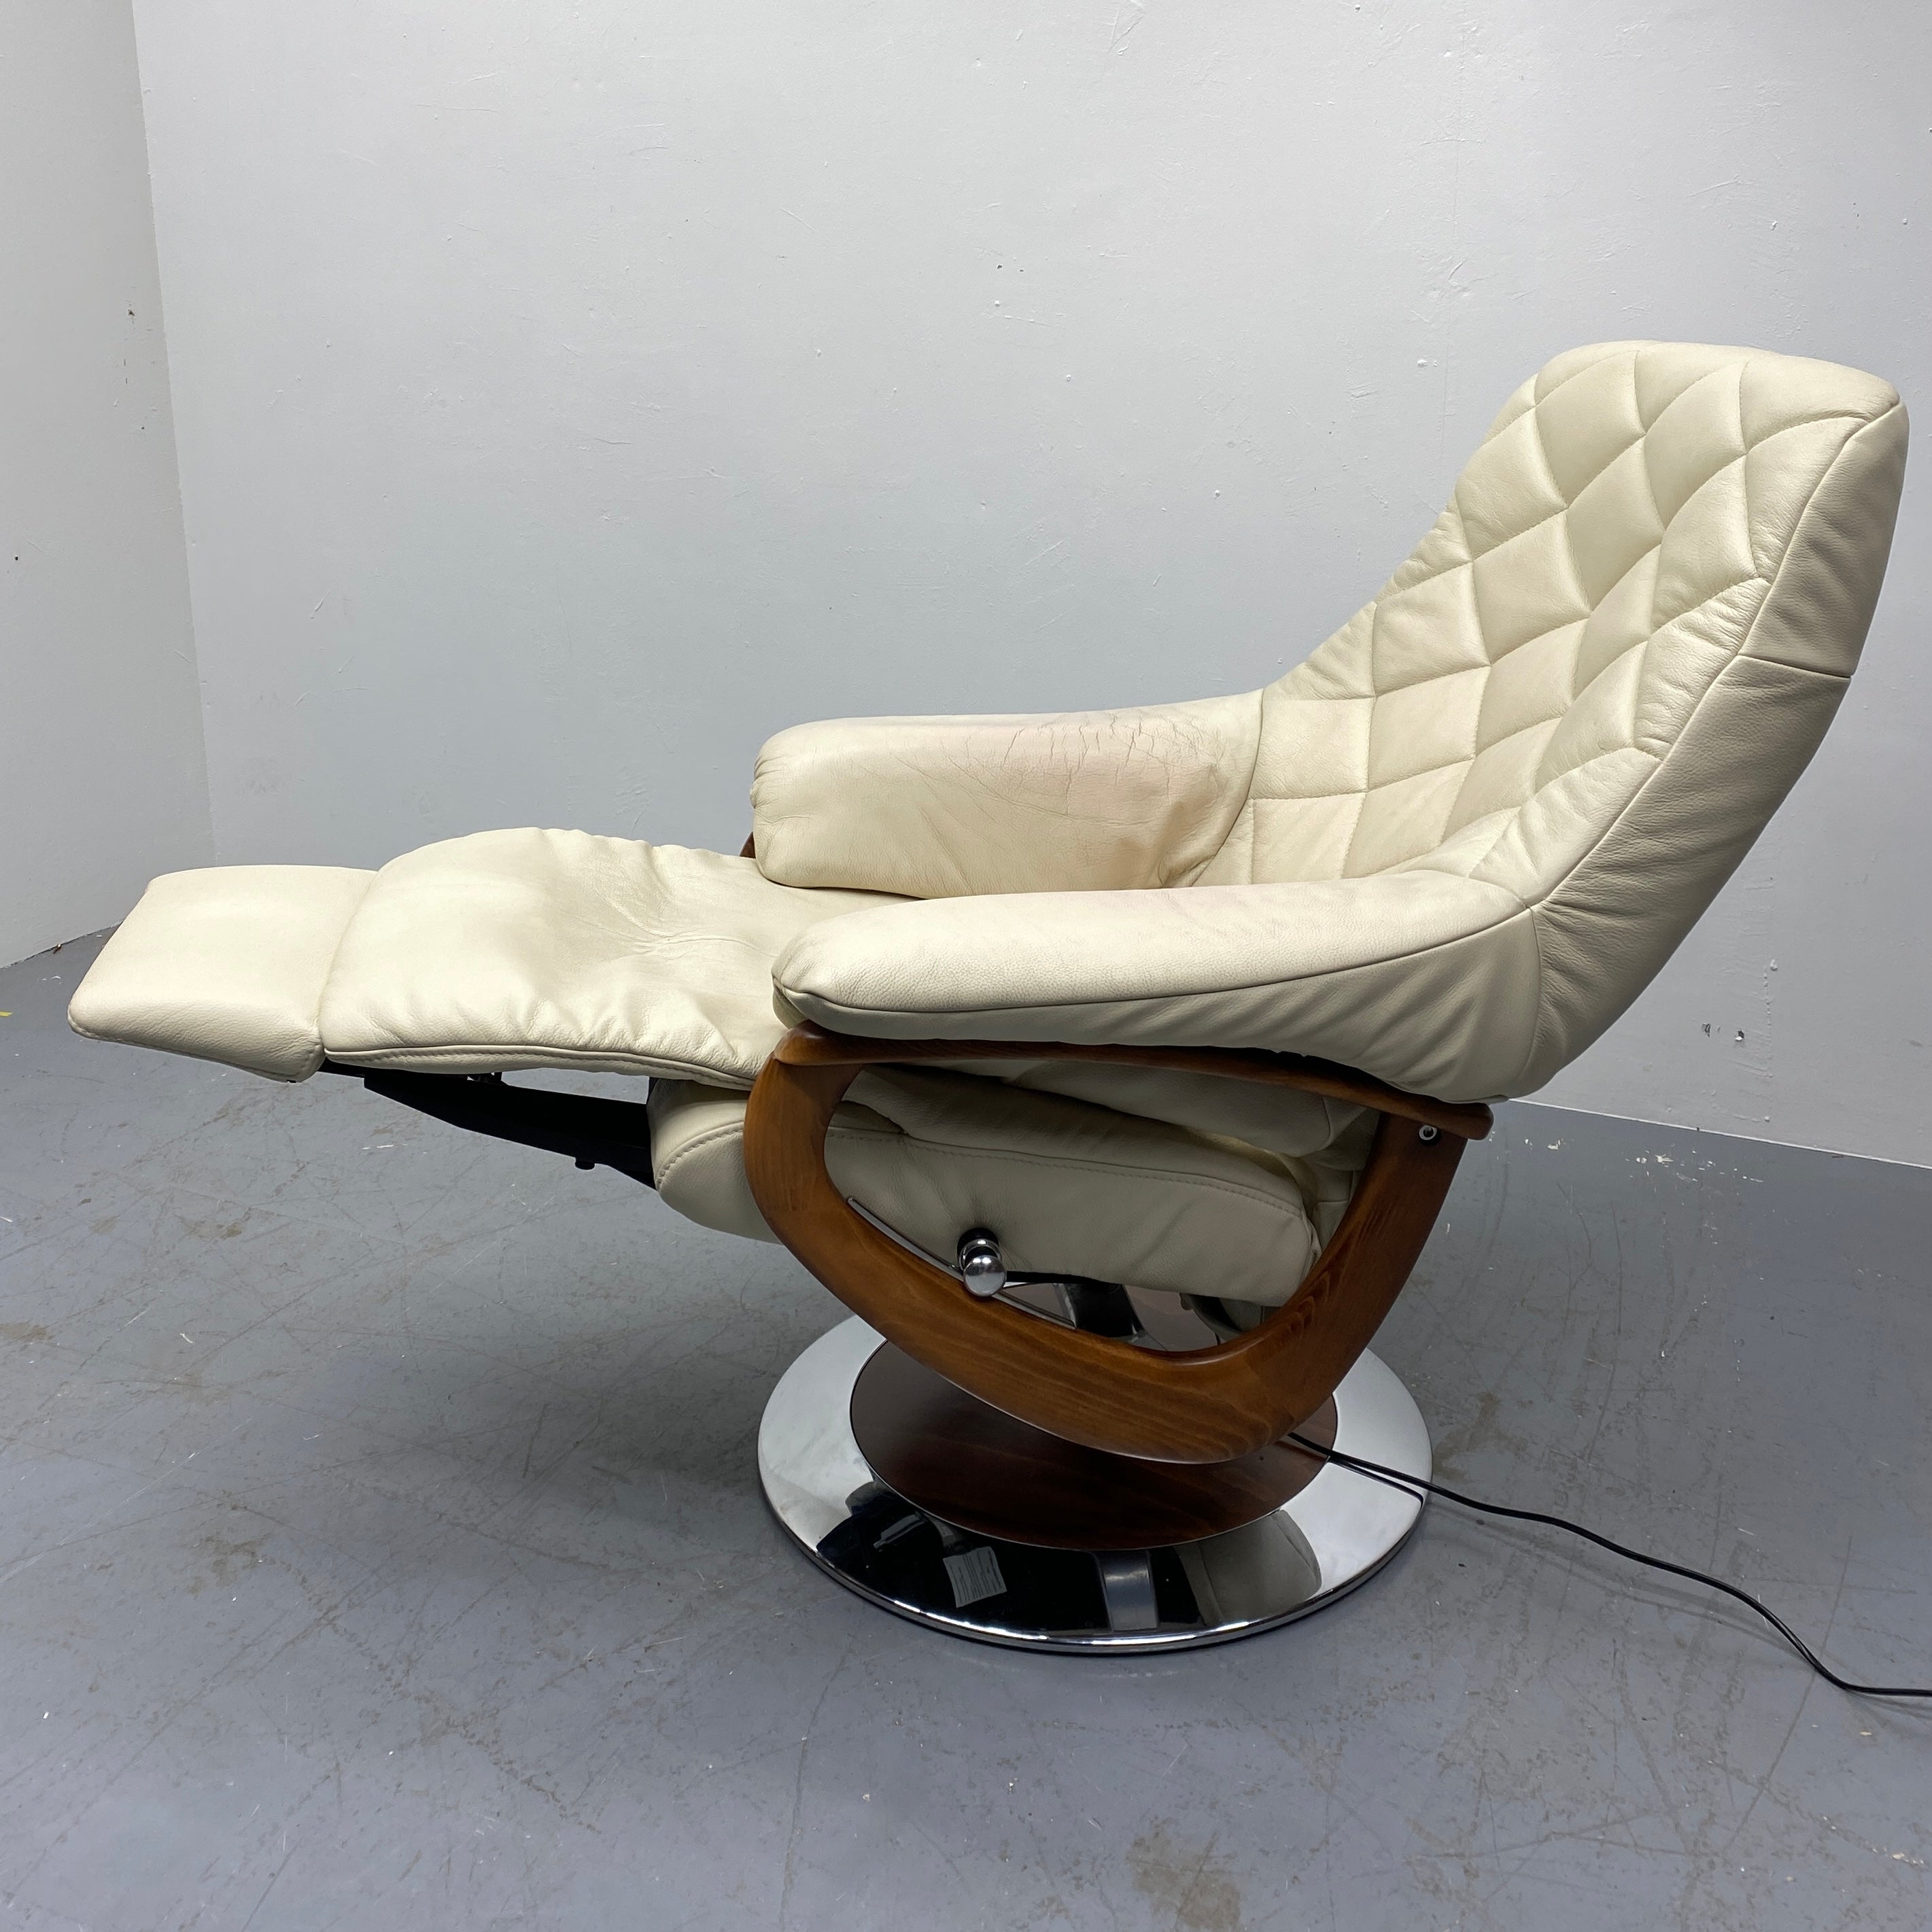 Reclined Chair Leather